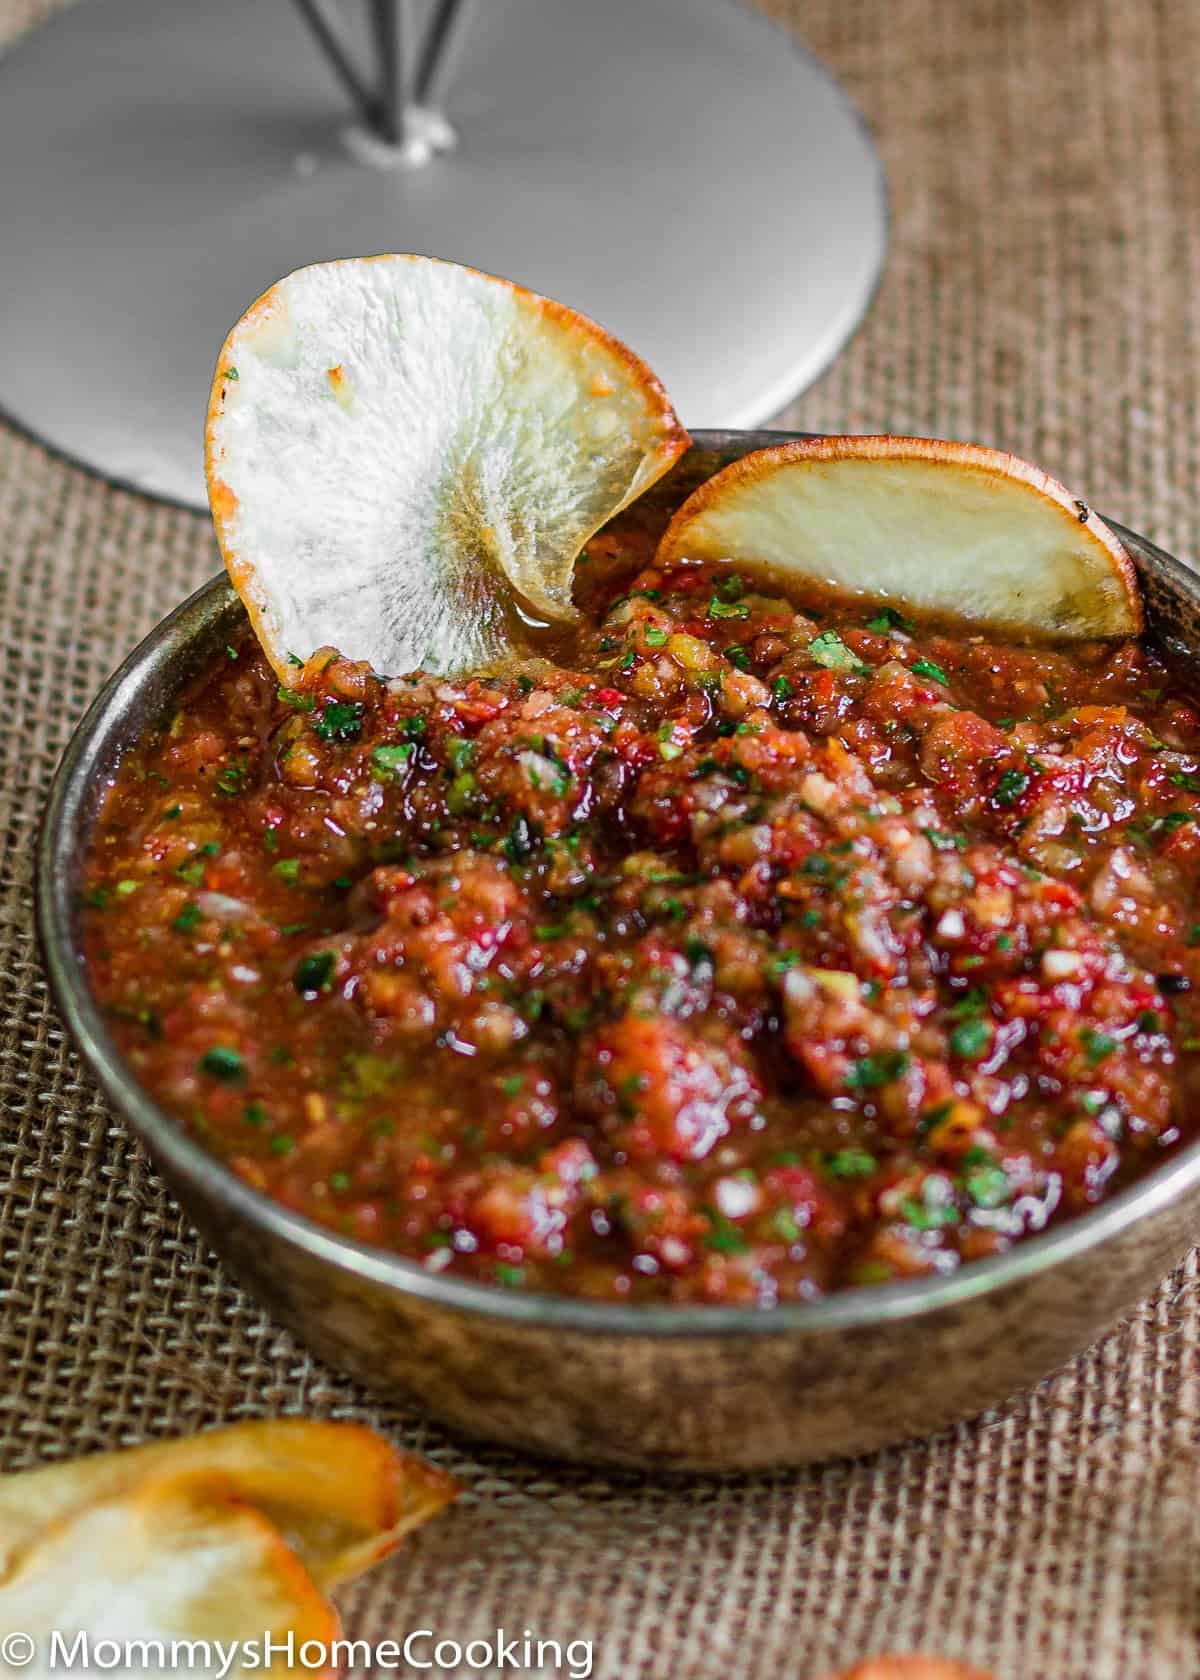 homemade salsa in a bowl  with chips